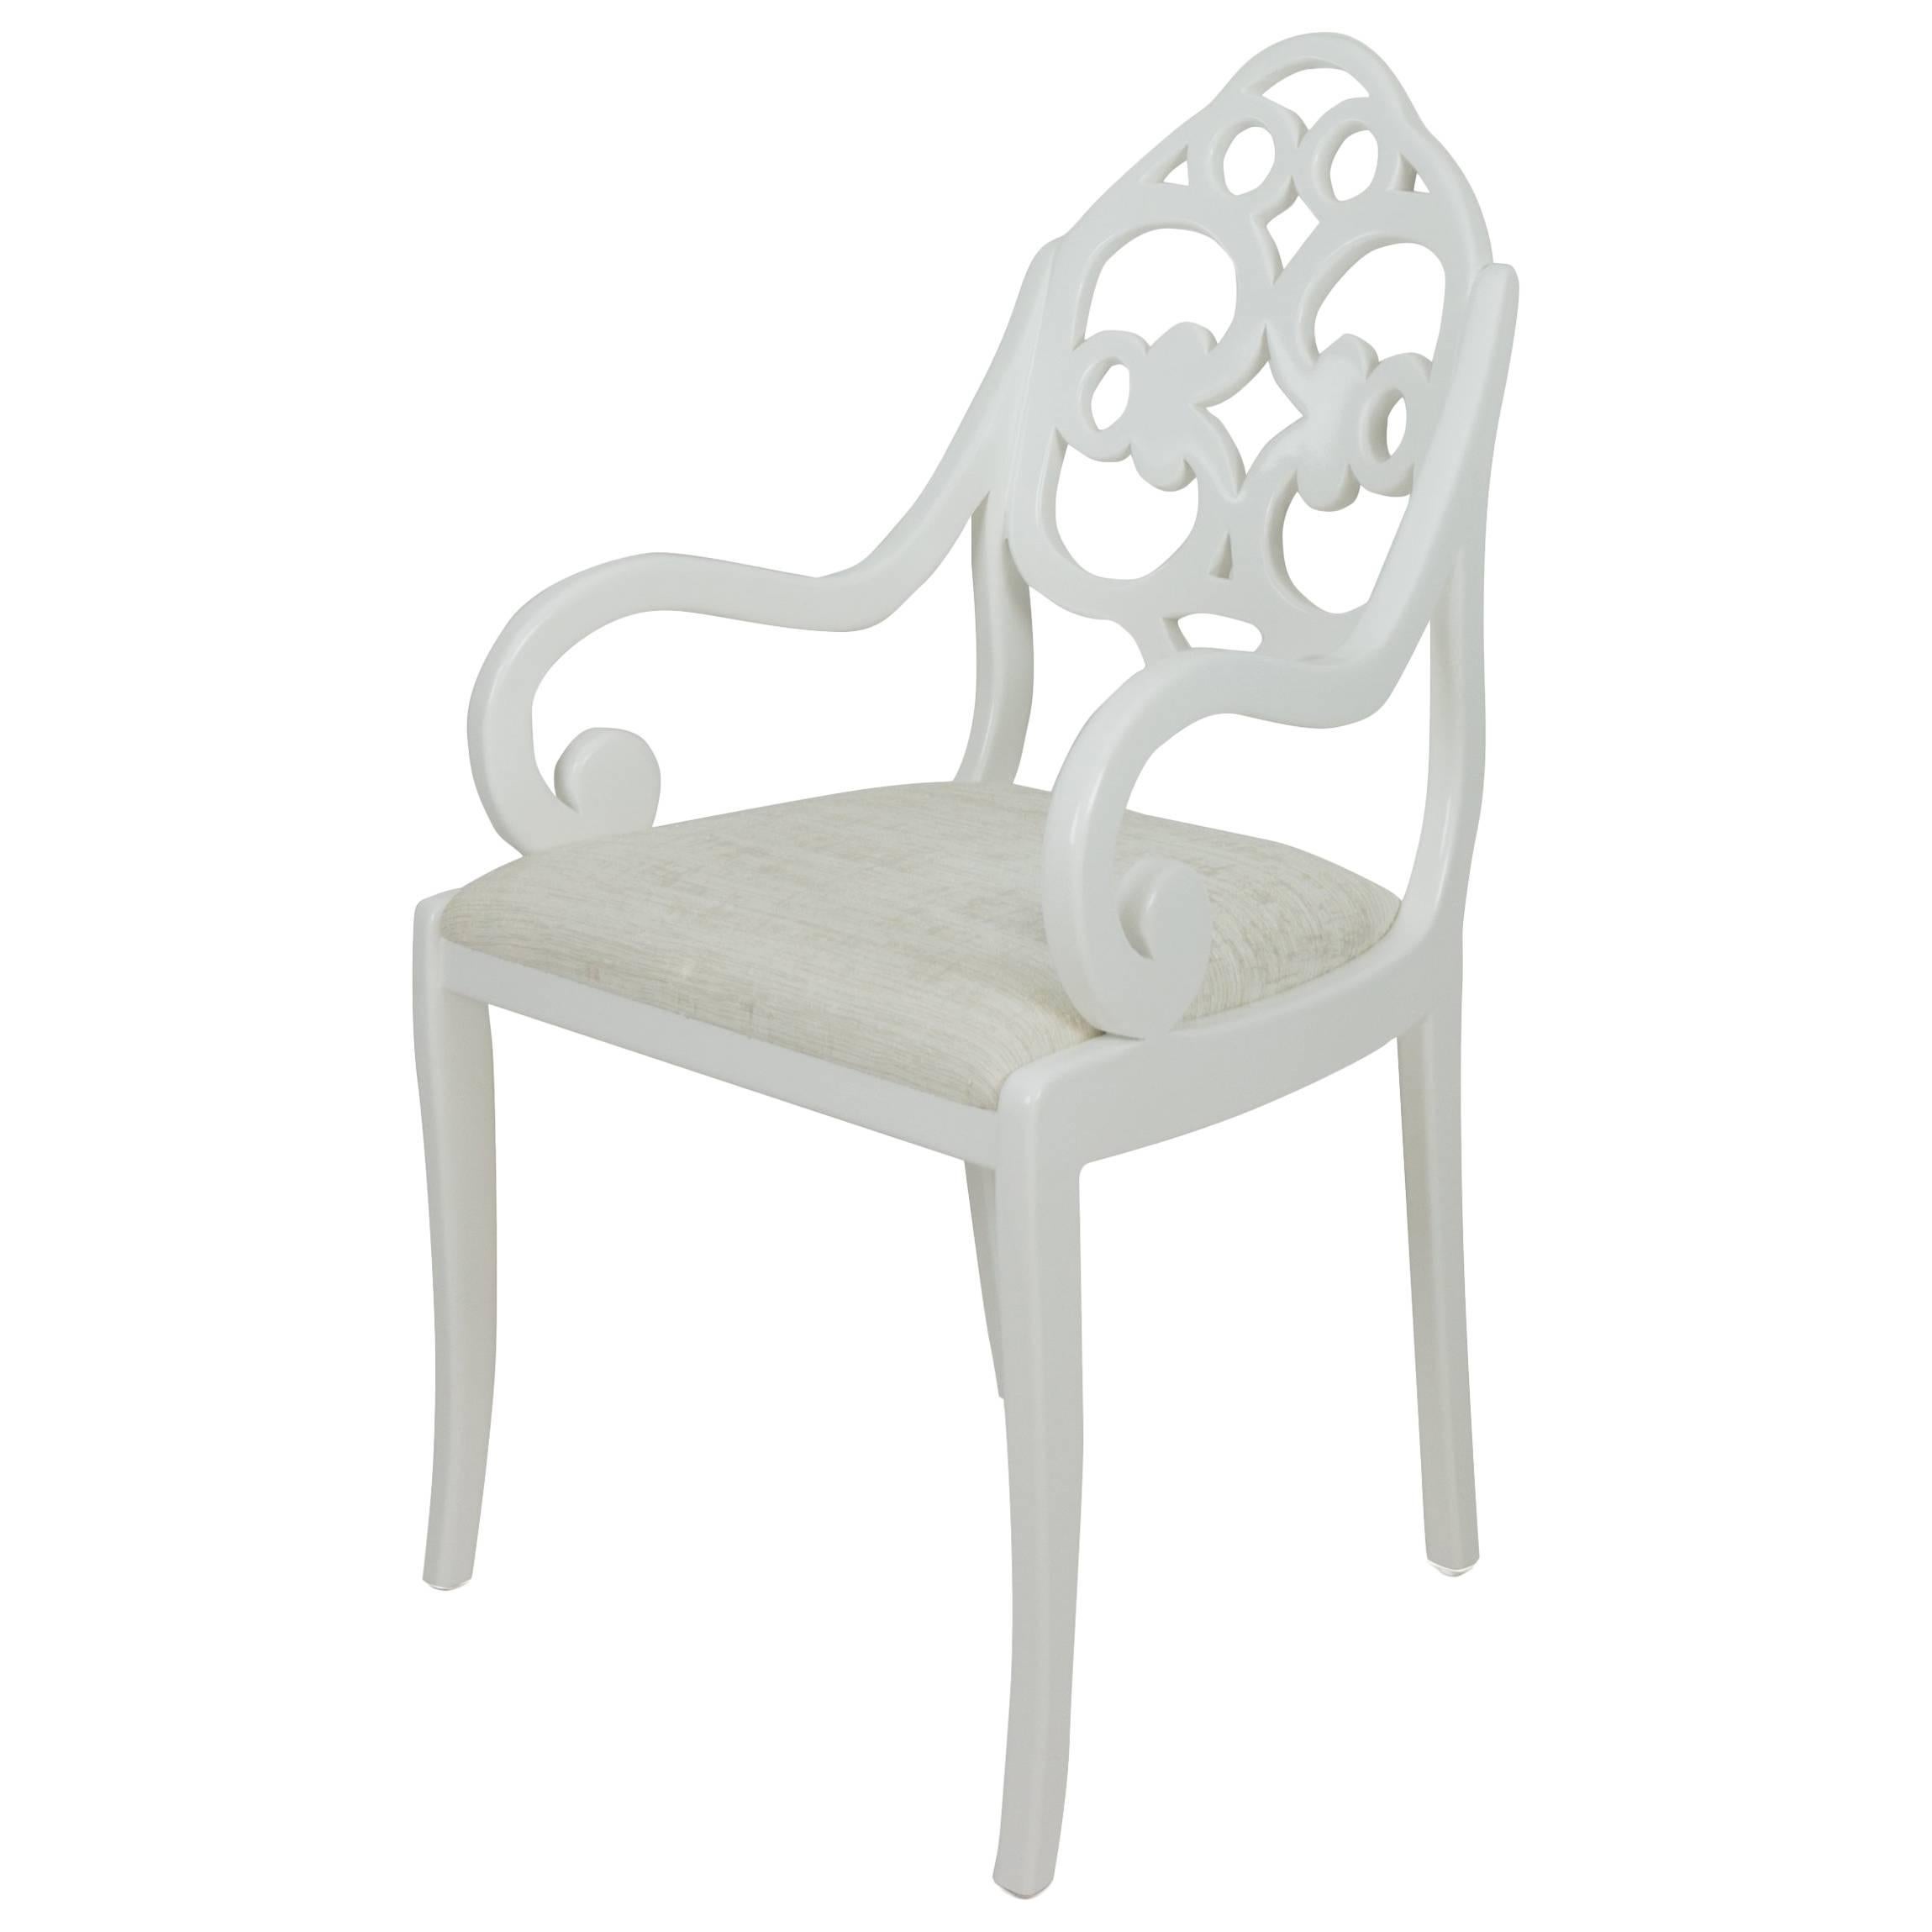 Hand-carved English Regency-inspired American dining chairs